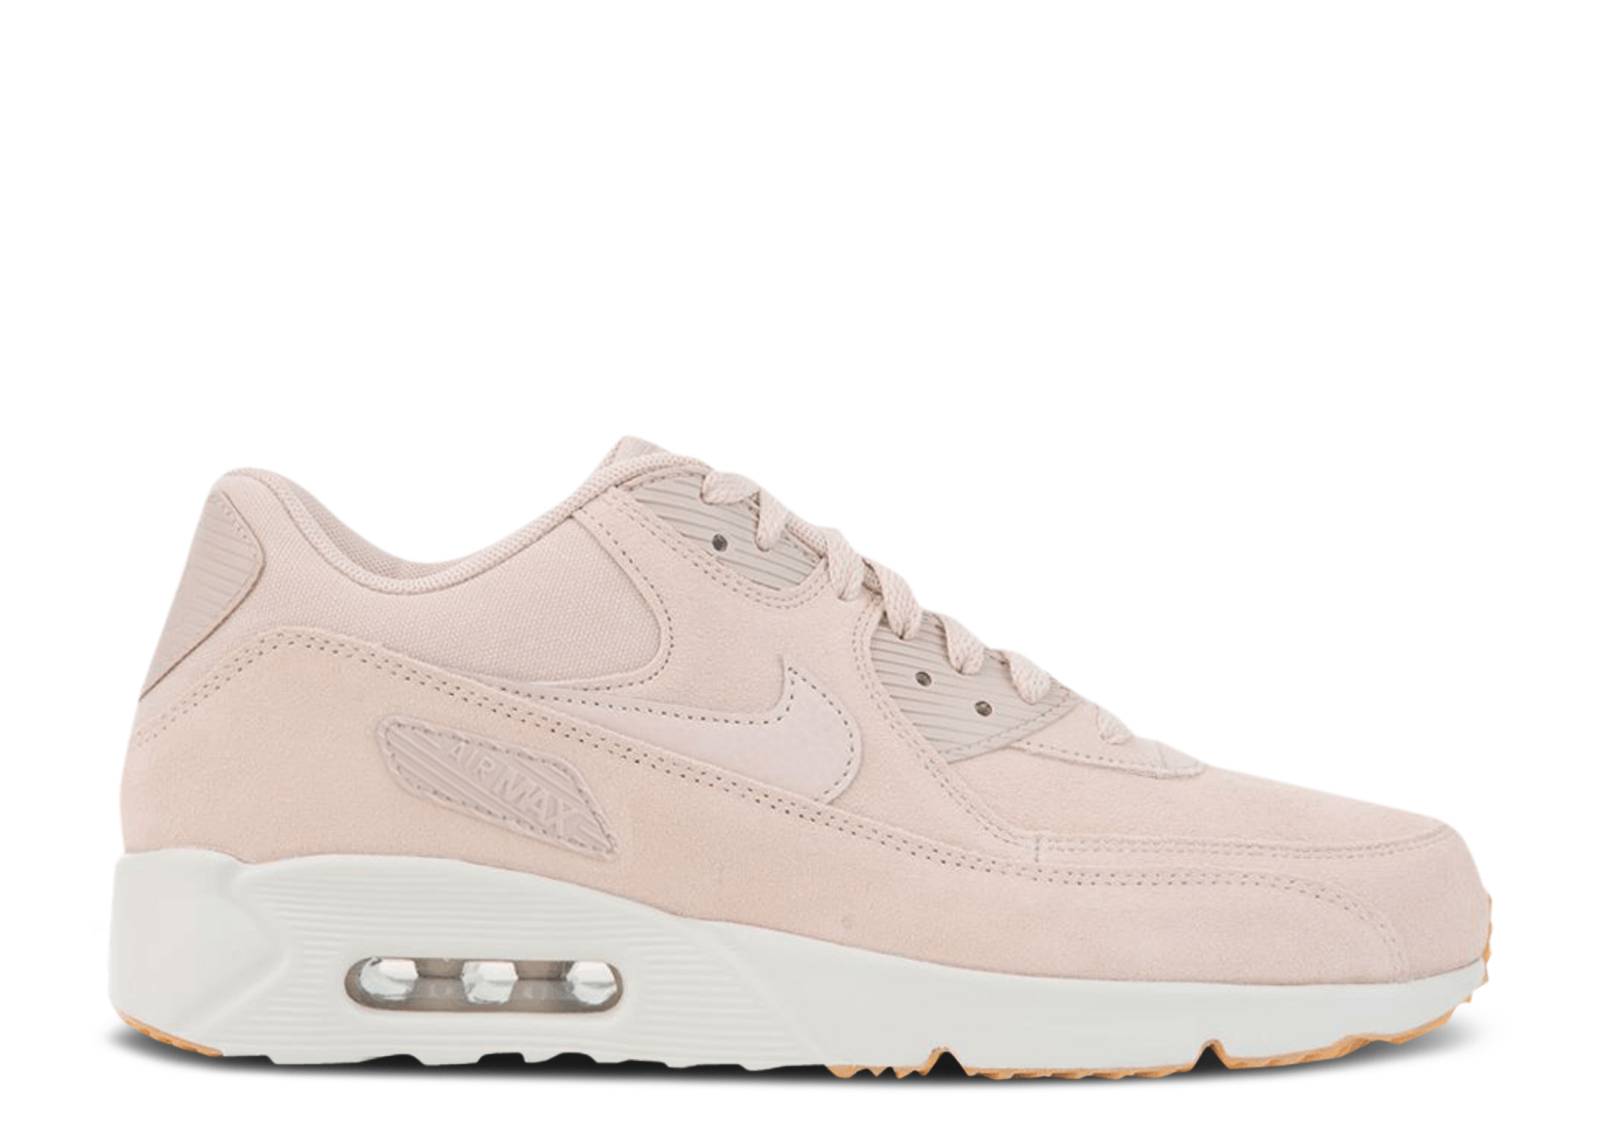 Air Max 90 Ultra 2.0 Leather 'Particle Beige'